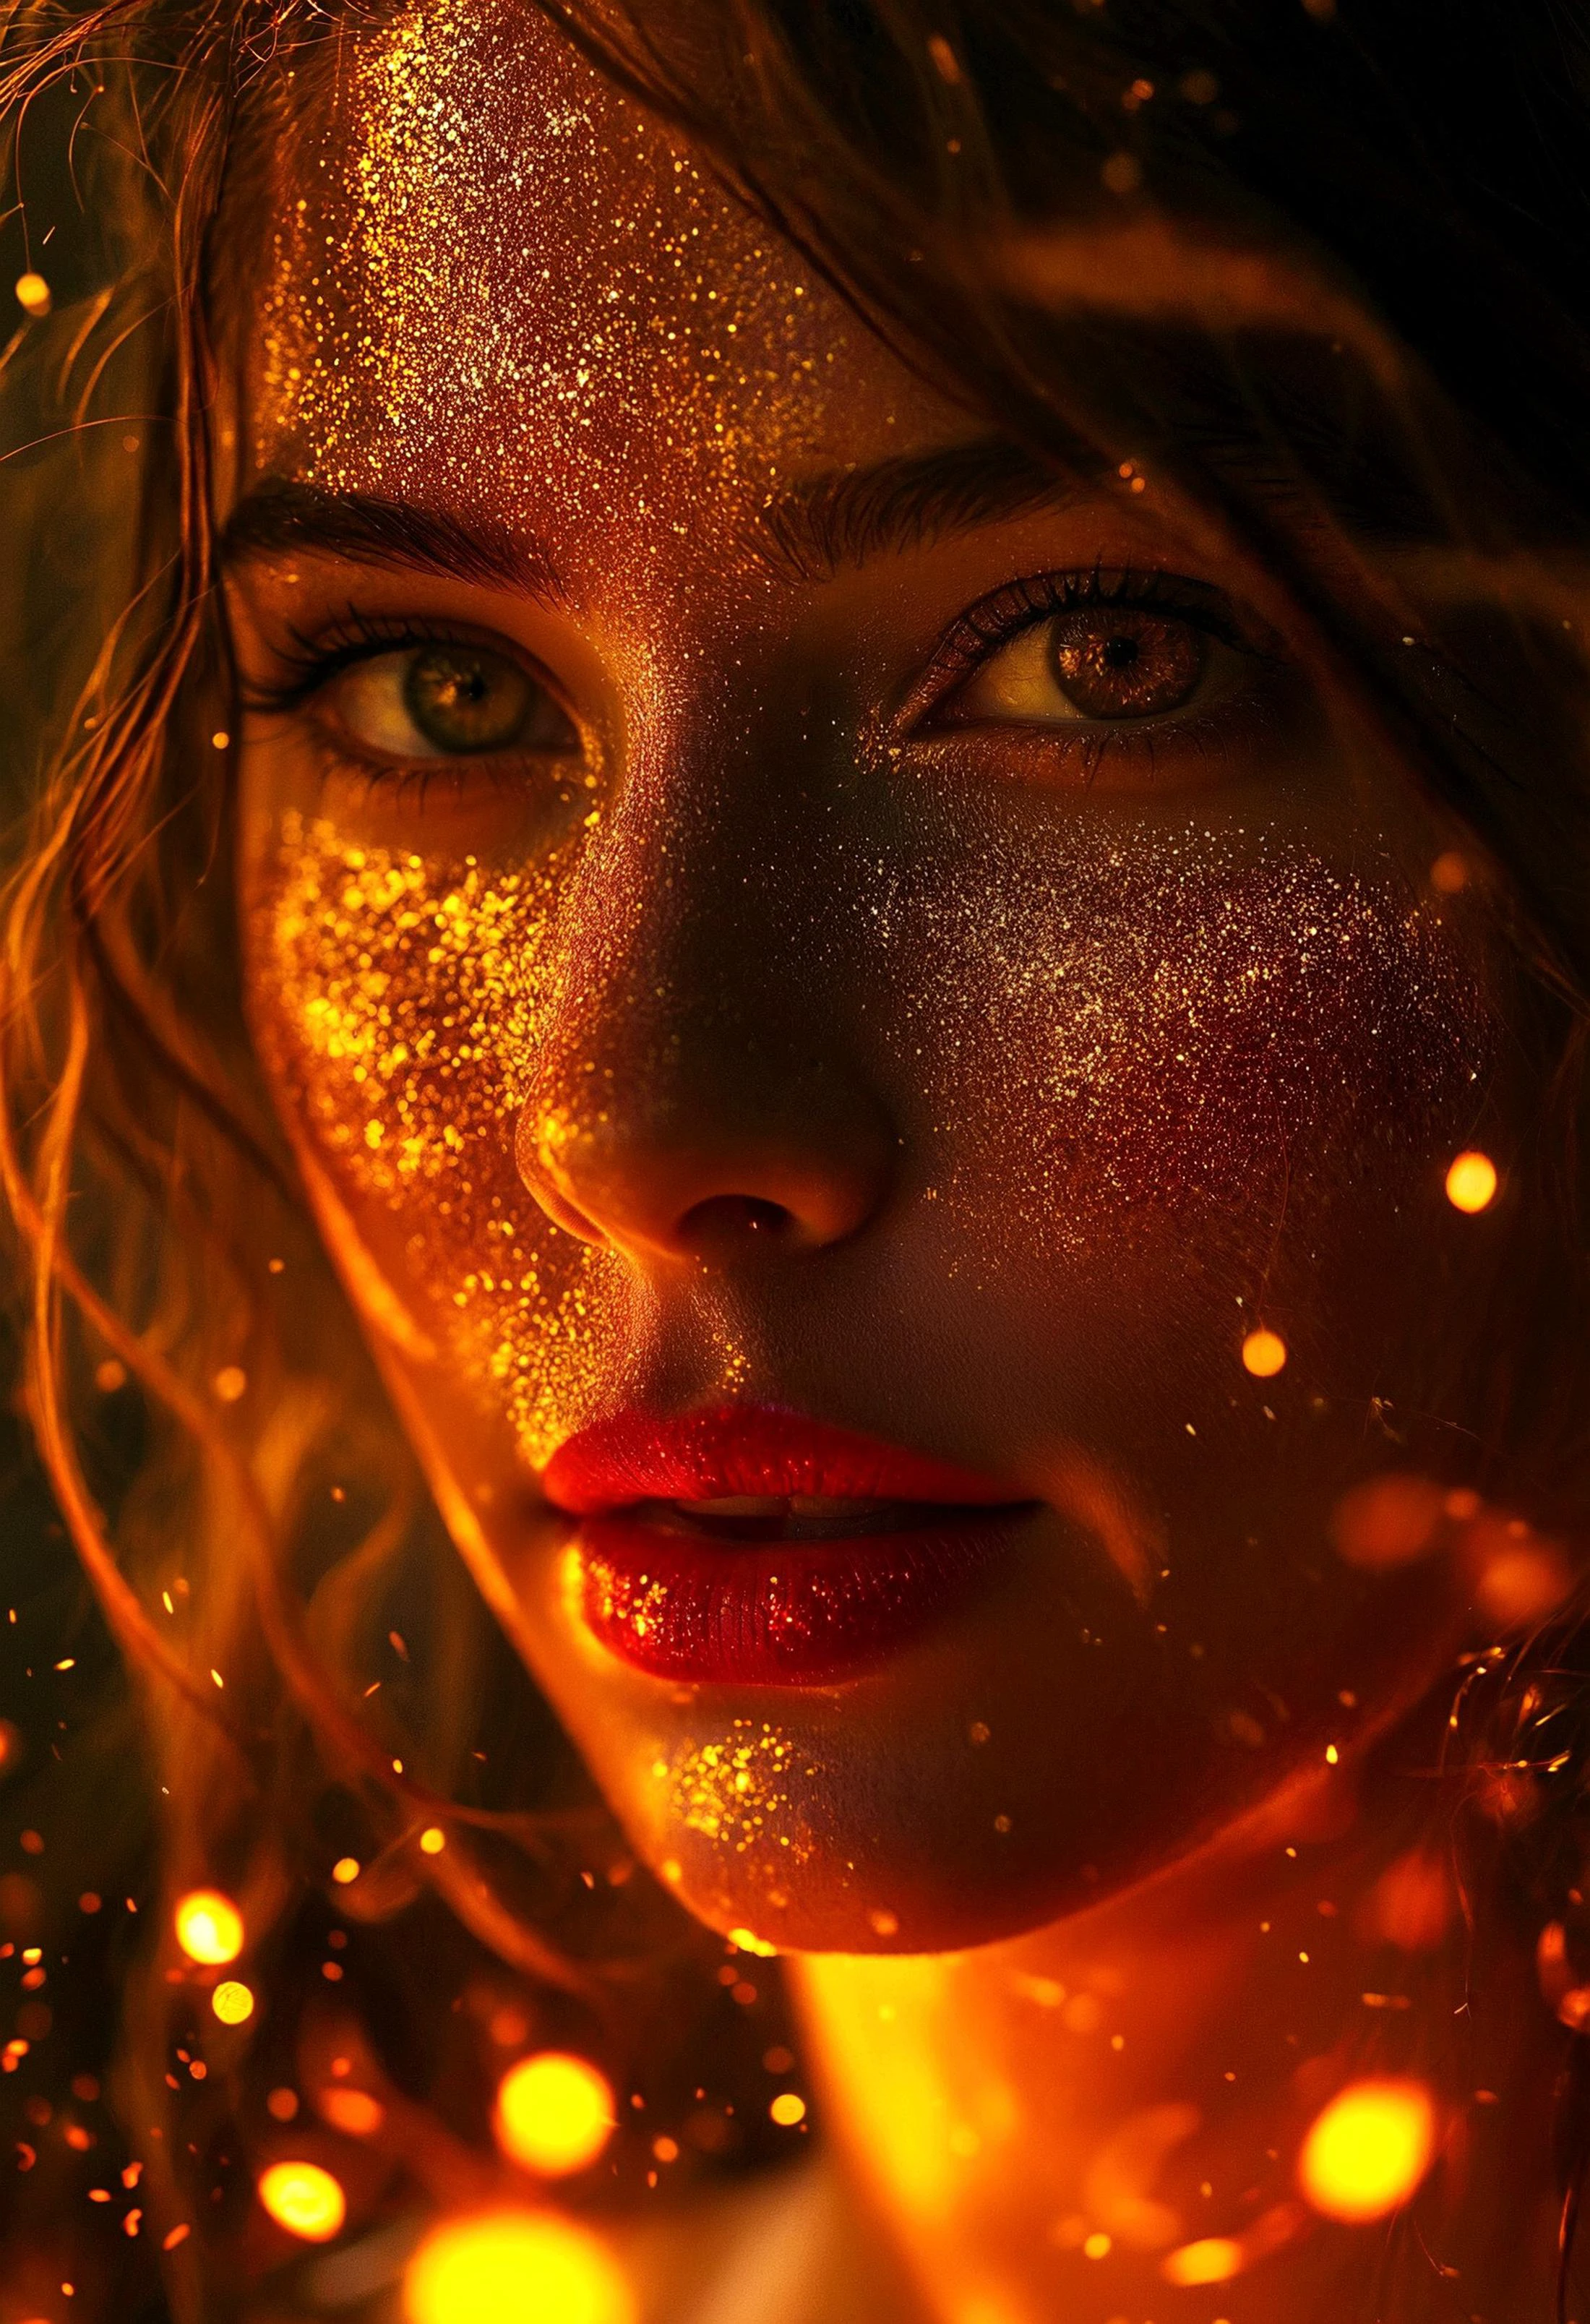 A movie film still of super very close-up portrait of a beautiful 18 year old woman with a mesmerizing and intense gaze, her face illuminated by warm, glowing light. She has glittering gold dust on her face, gold reflection in her eyes, and her lips are a deep, glossy red with shiny sparkles. The background is dark, with sparks and embers floating around her, creating a mystical and fiery atmosphere. Her expression is one of awe and wonder, with eyes reflecting the glowing light. Her hair is slightly messy, adding to the dramatic and ethereal feel of the scene. soaked film, 4k , 8k ,UHD, slightly sweaty skin.